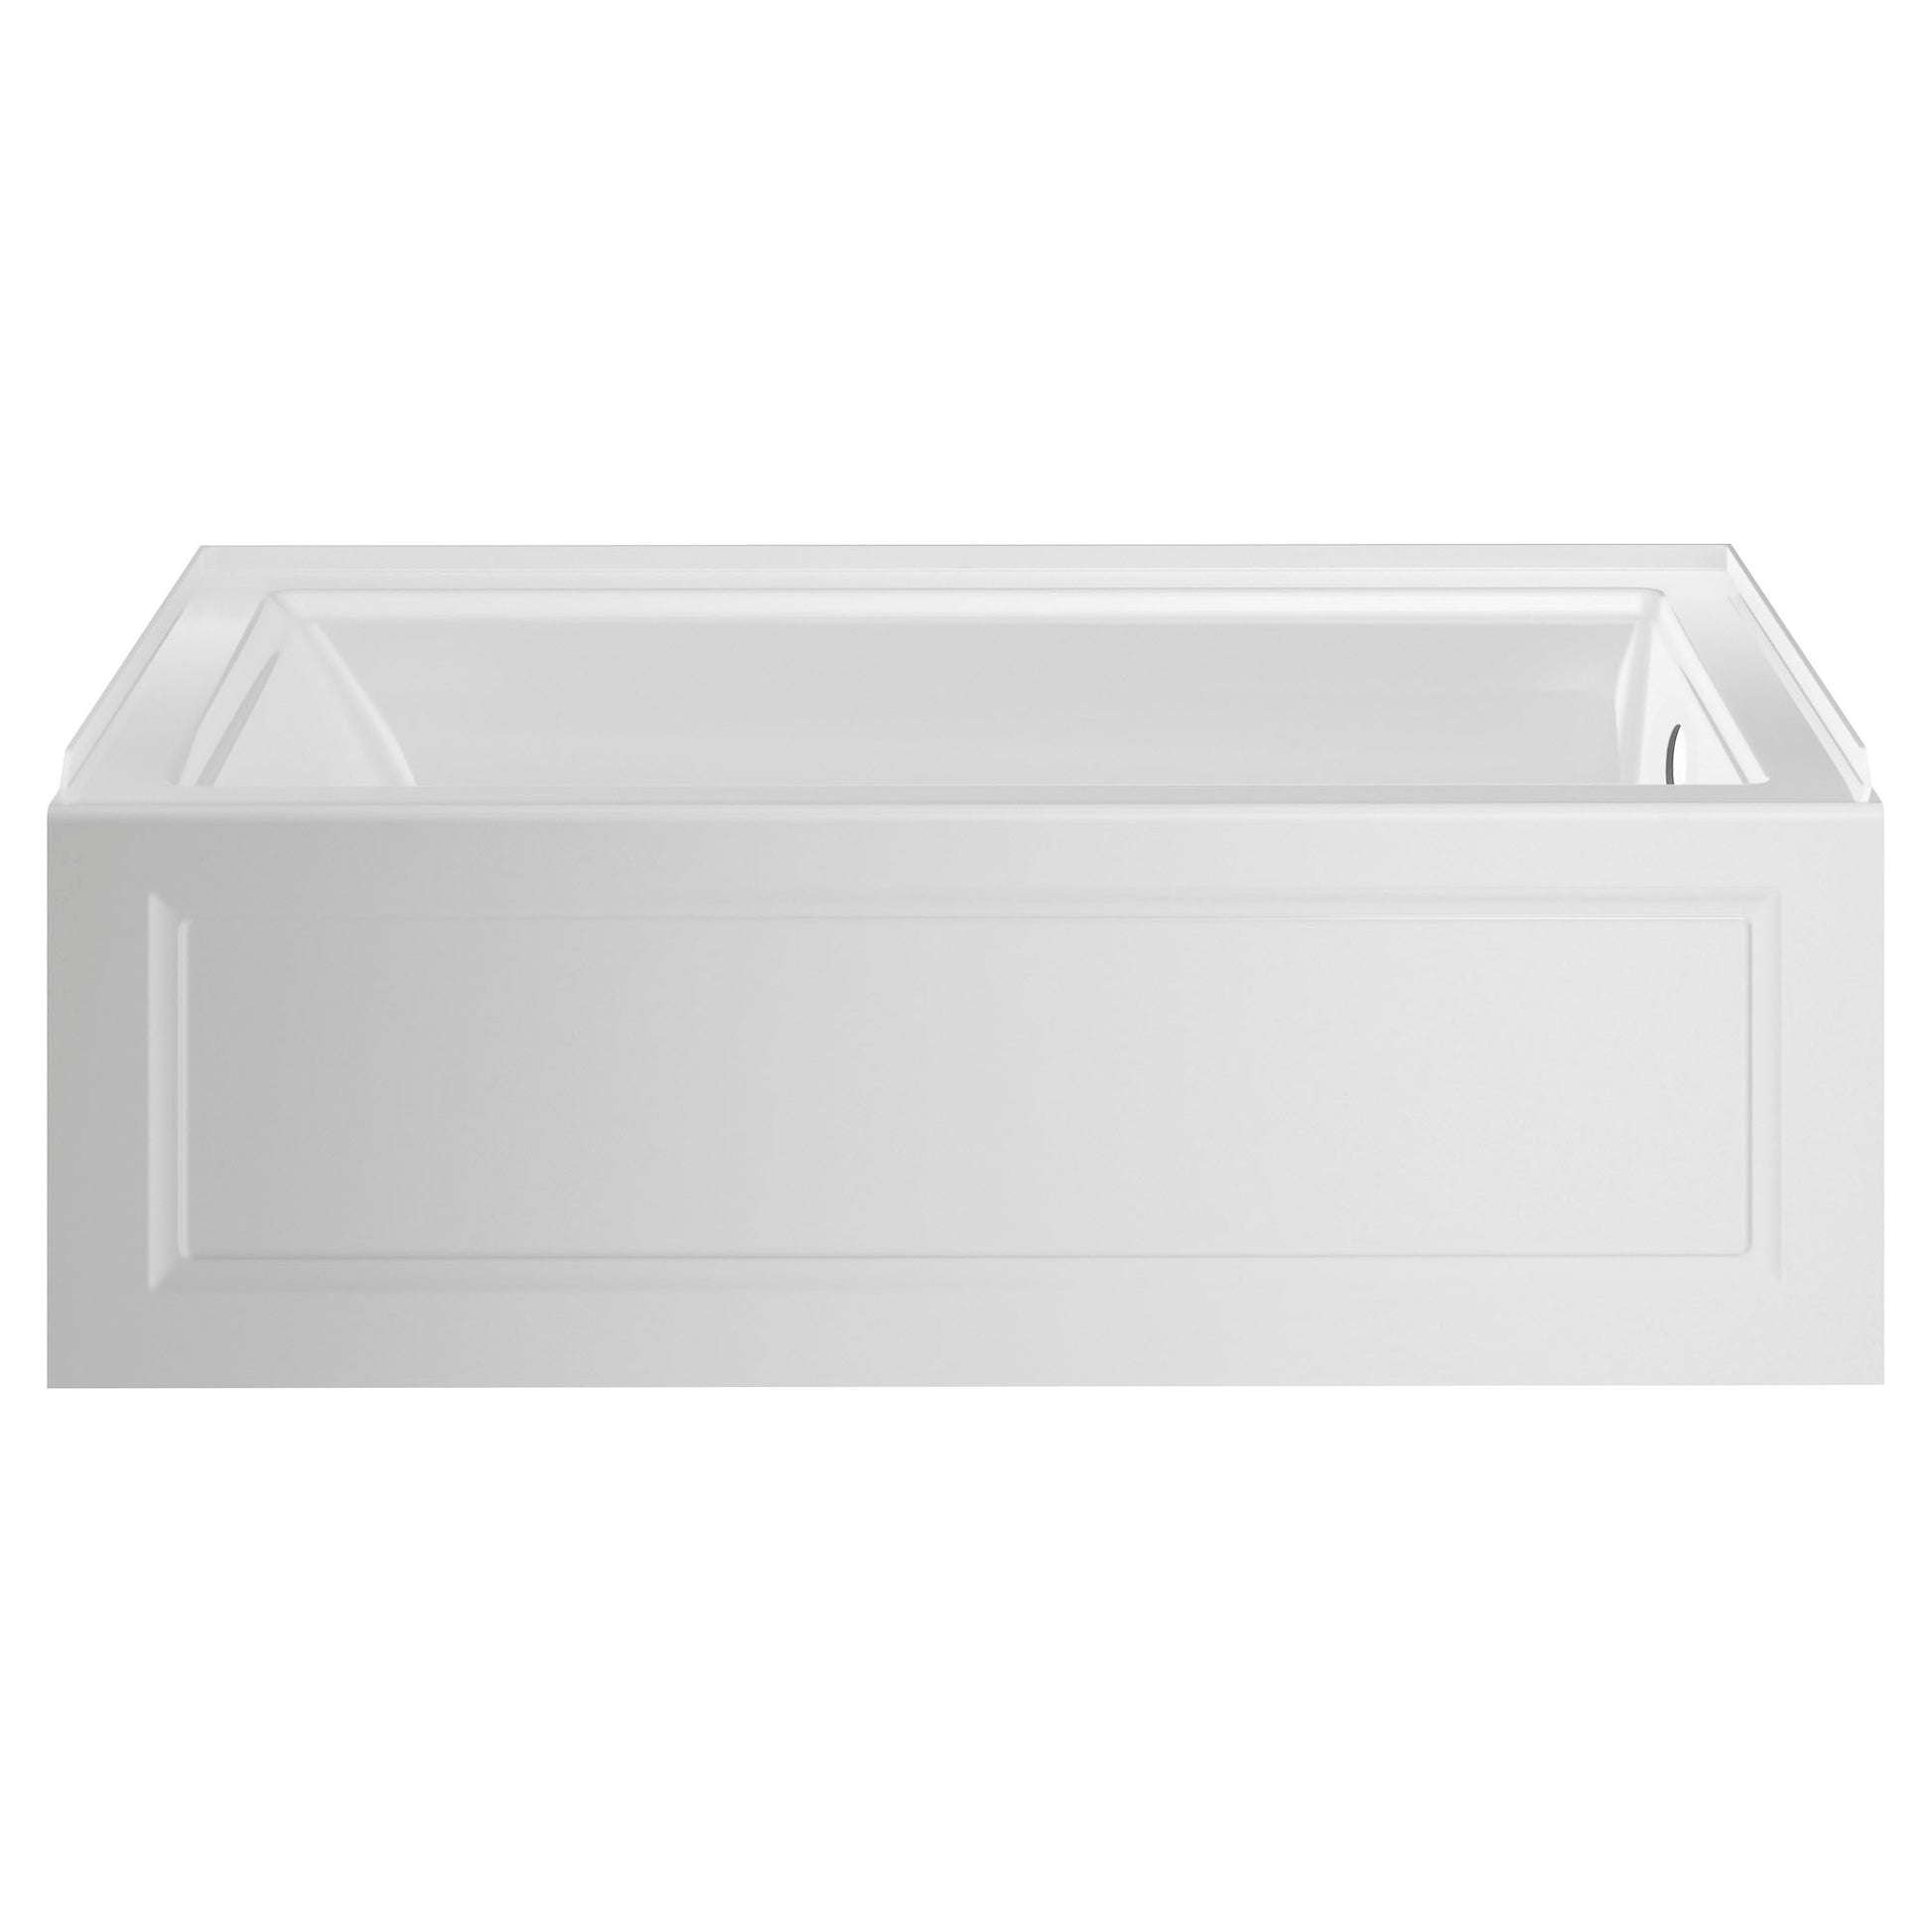 AMERICAN-STANDARD 2545102.020, Town Square S 60 x 30-Inch Integral Apron Bathtub With Right-Hand Outlet in White